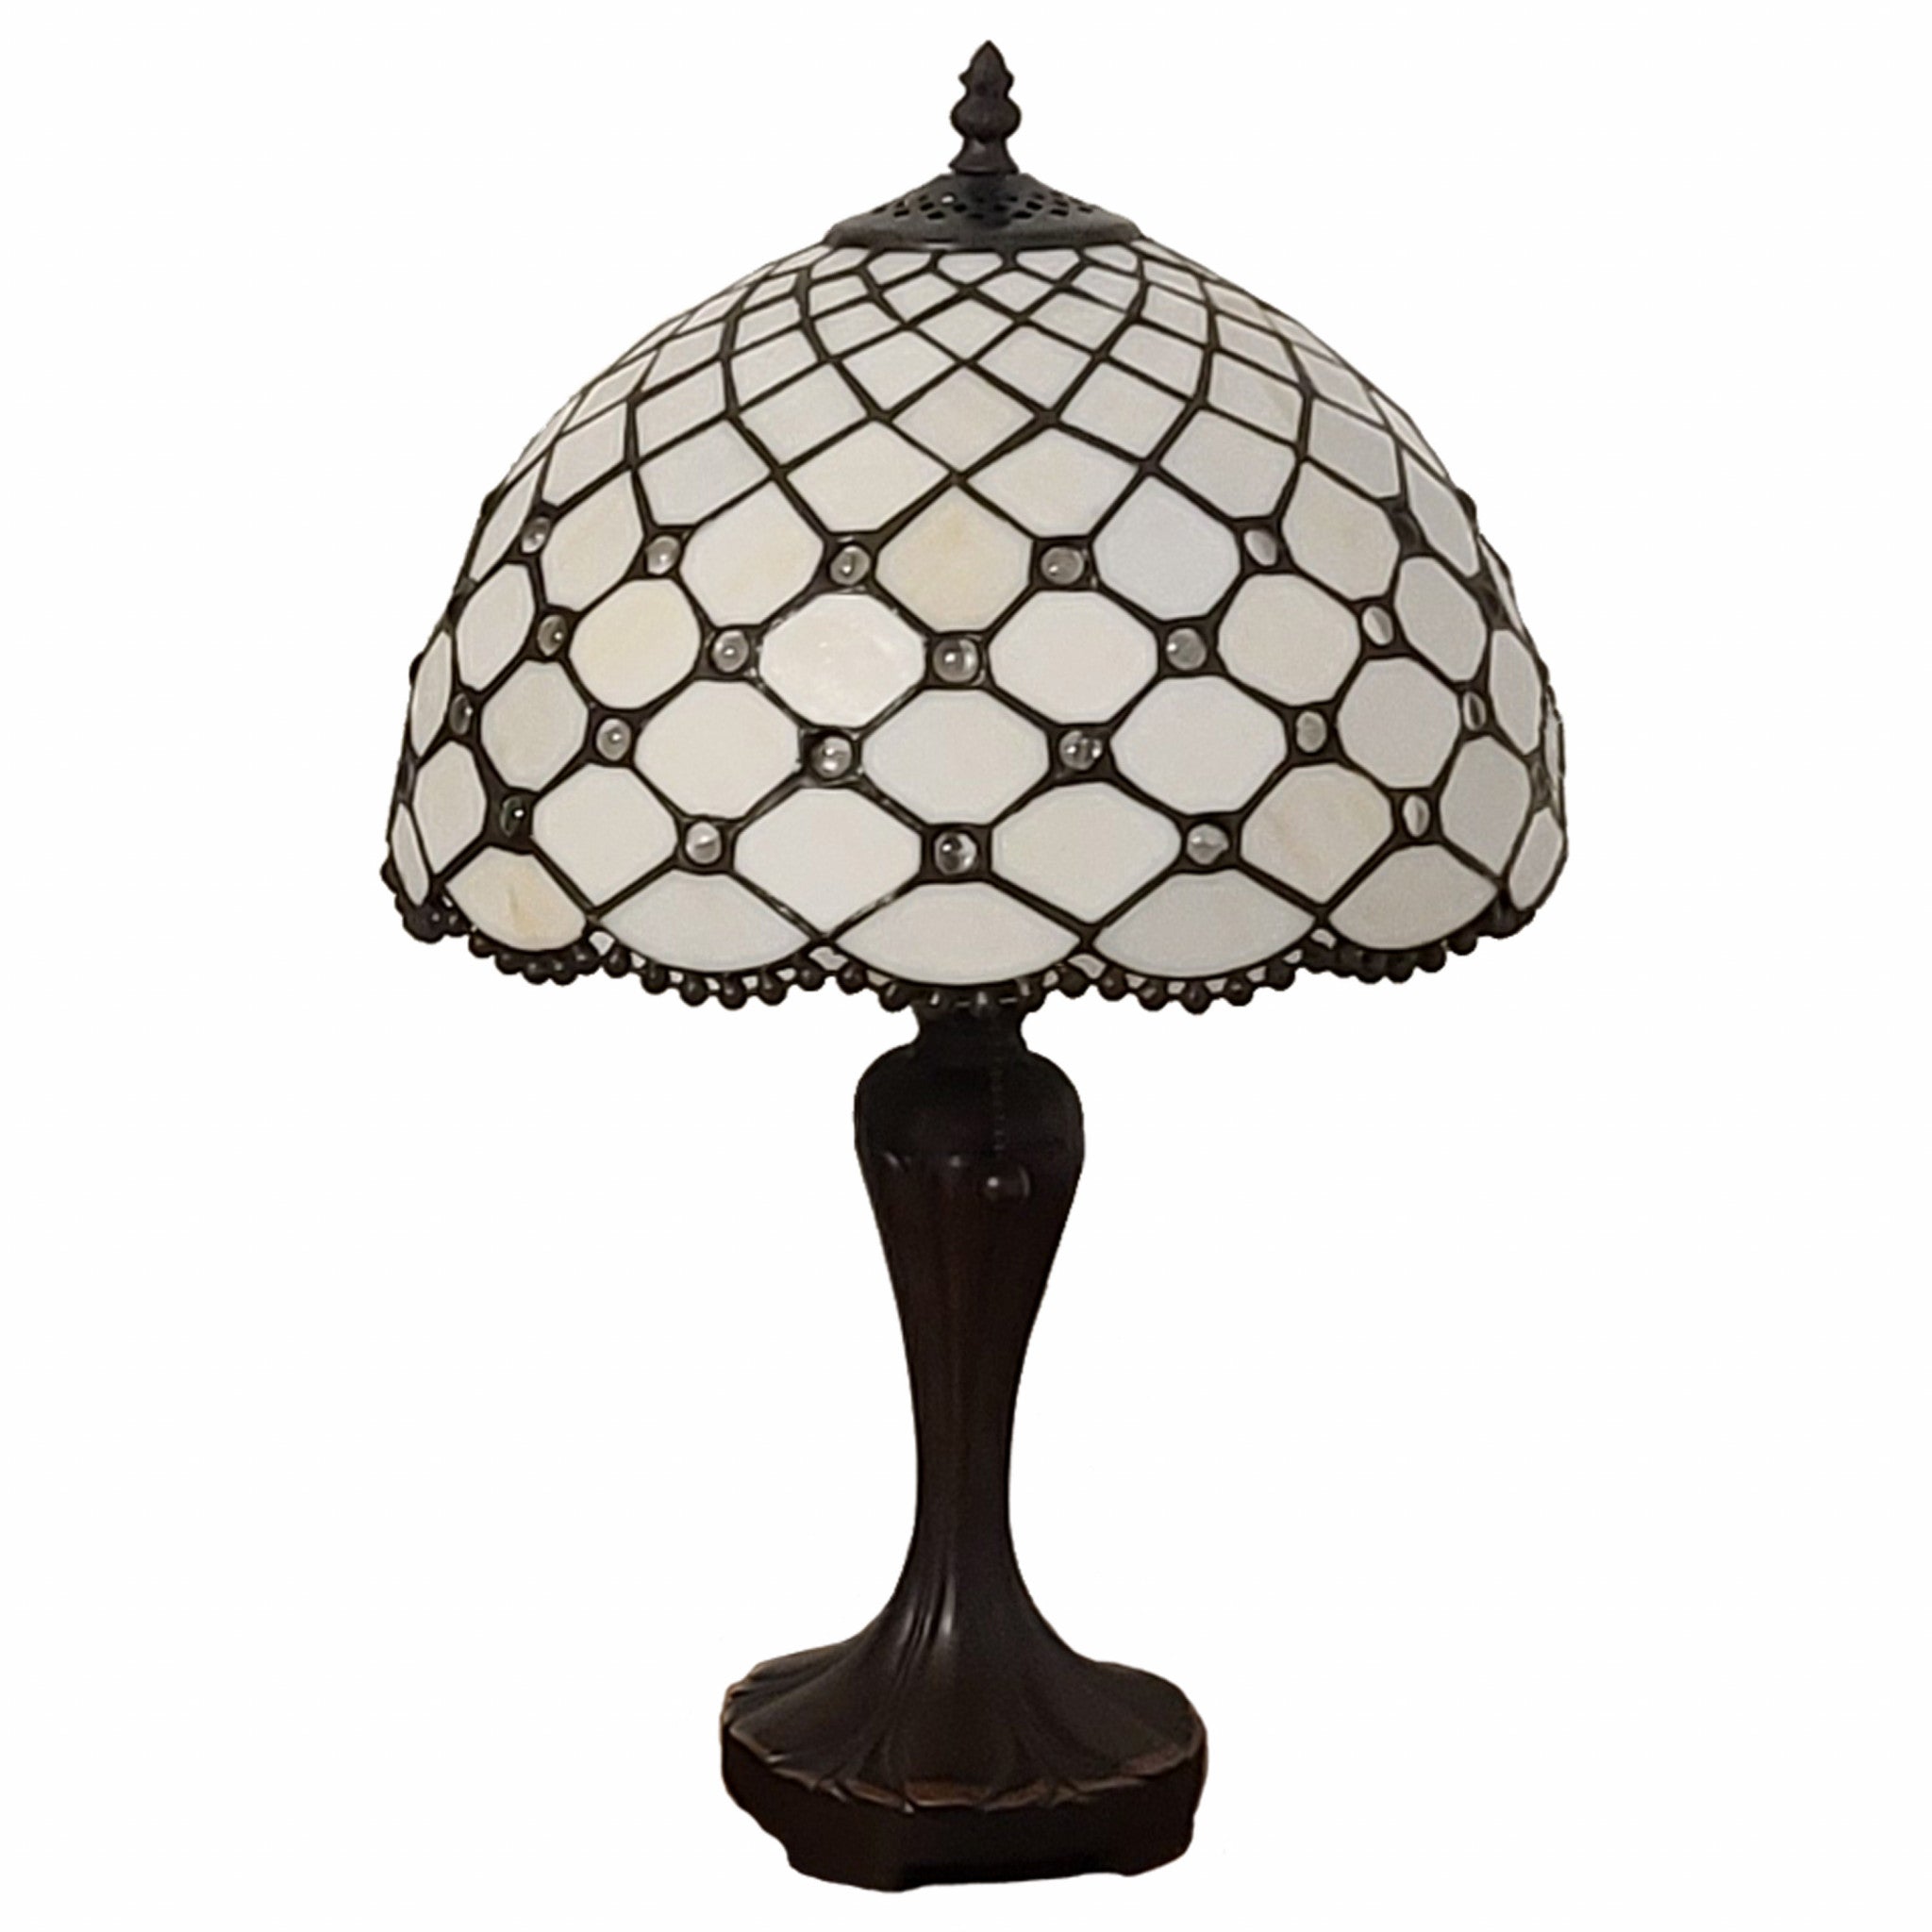 19" Dark Brown Metal Candlestick Table Lamp With White Dome Shade